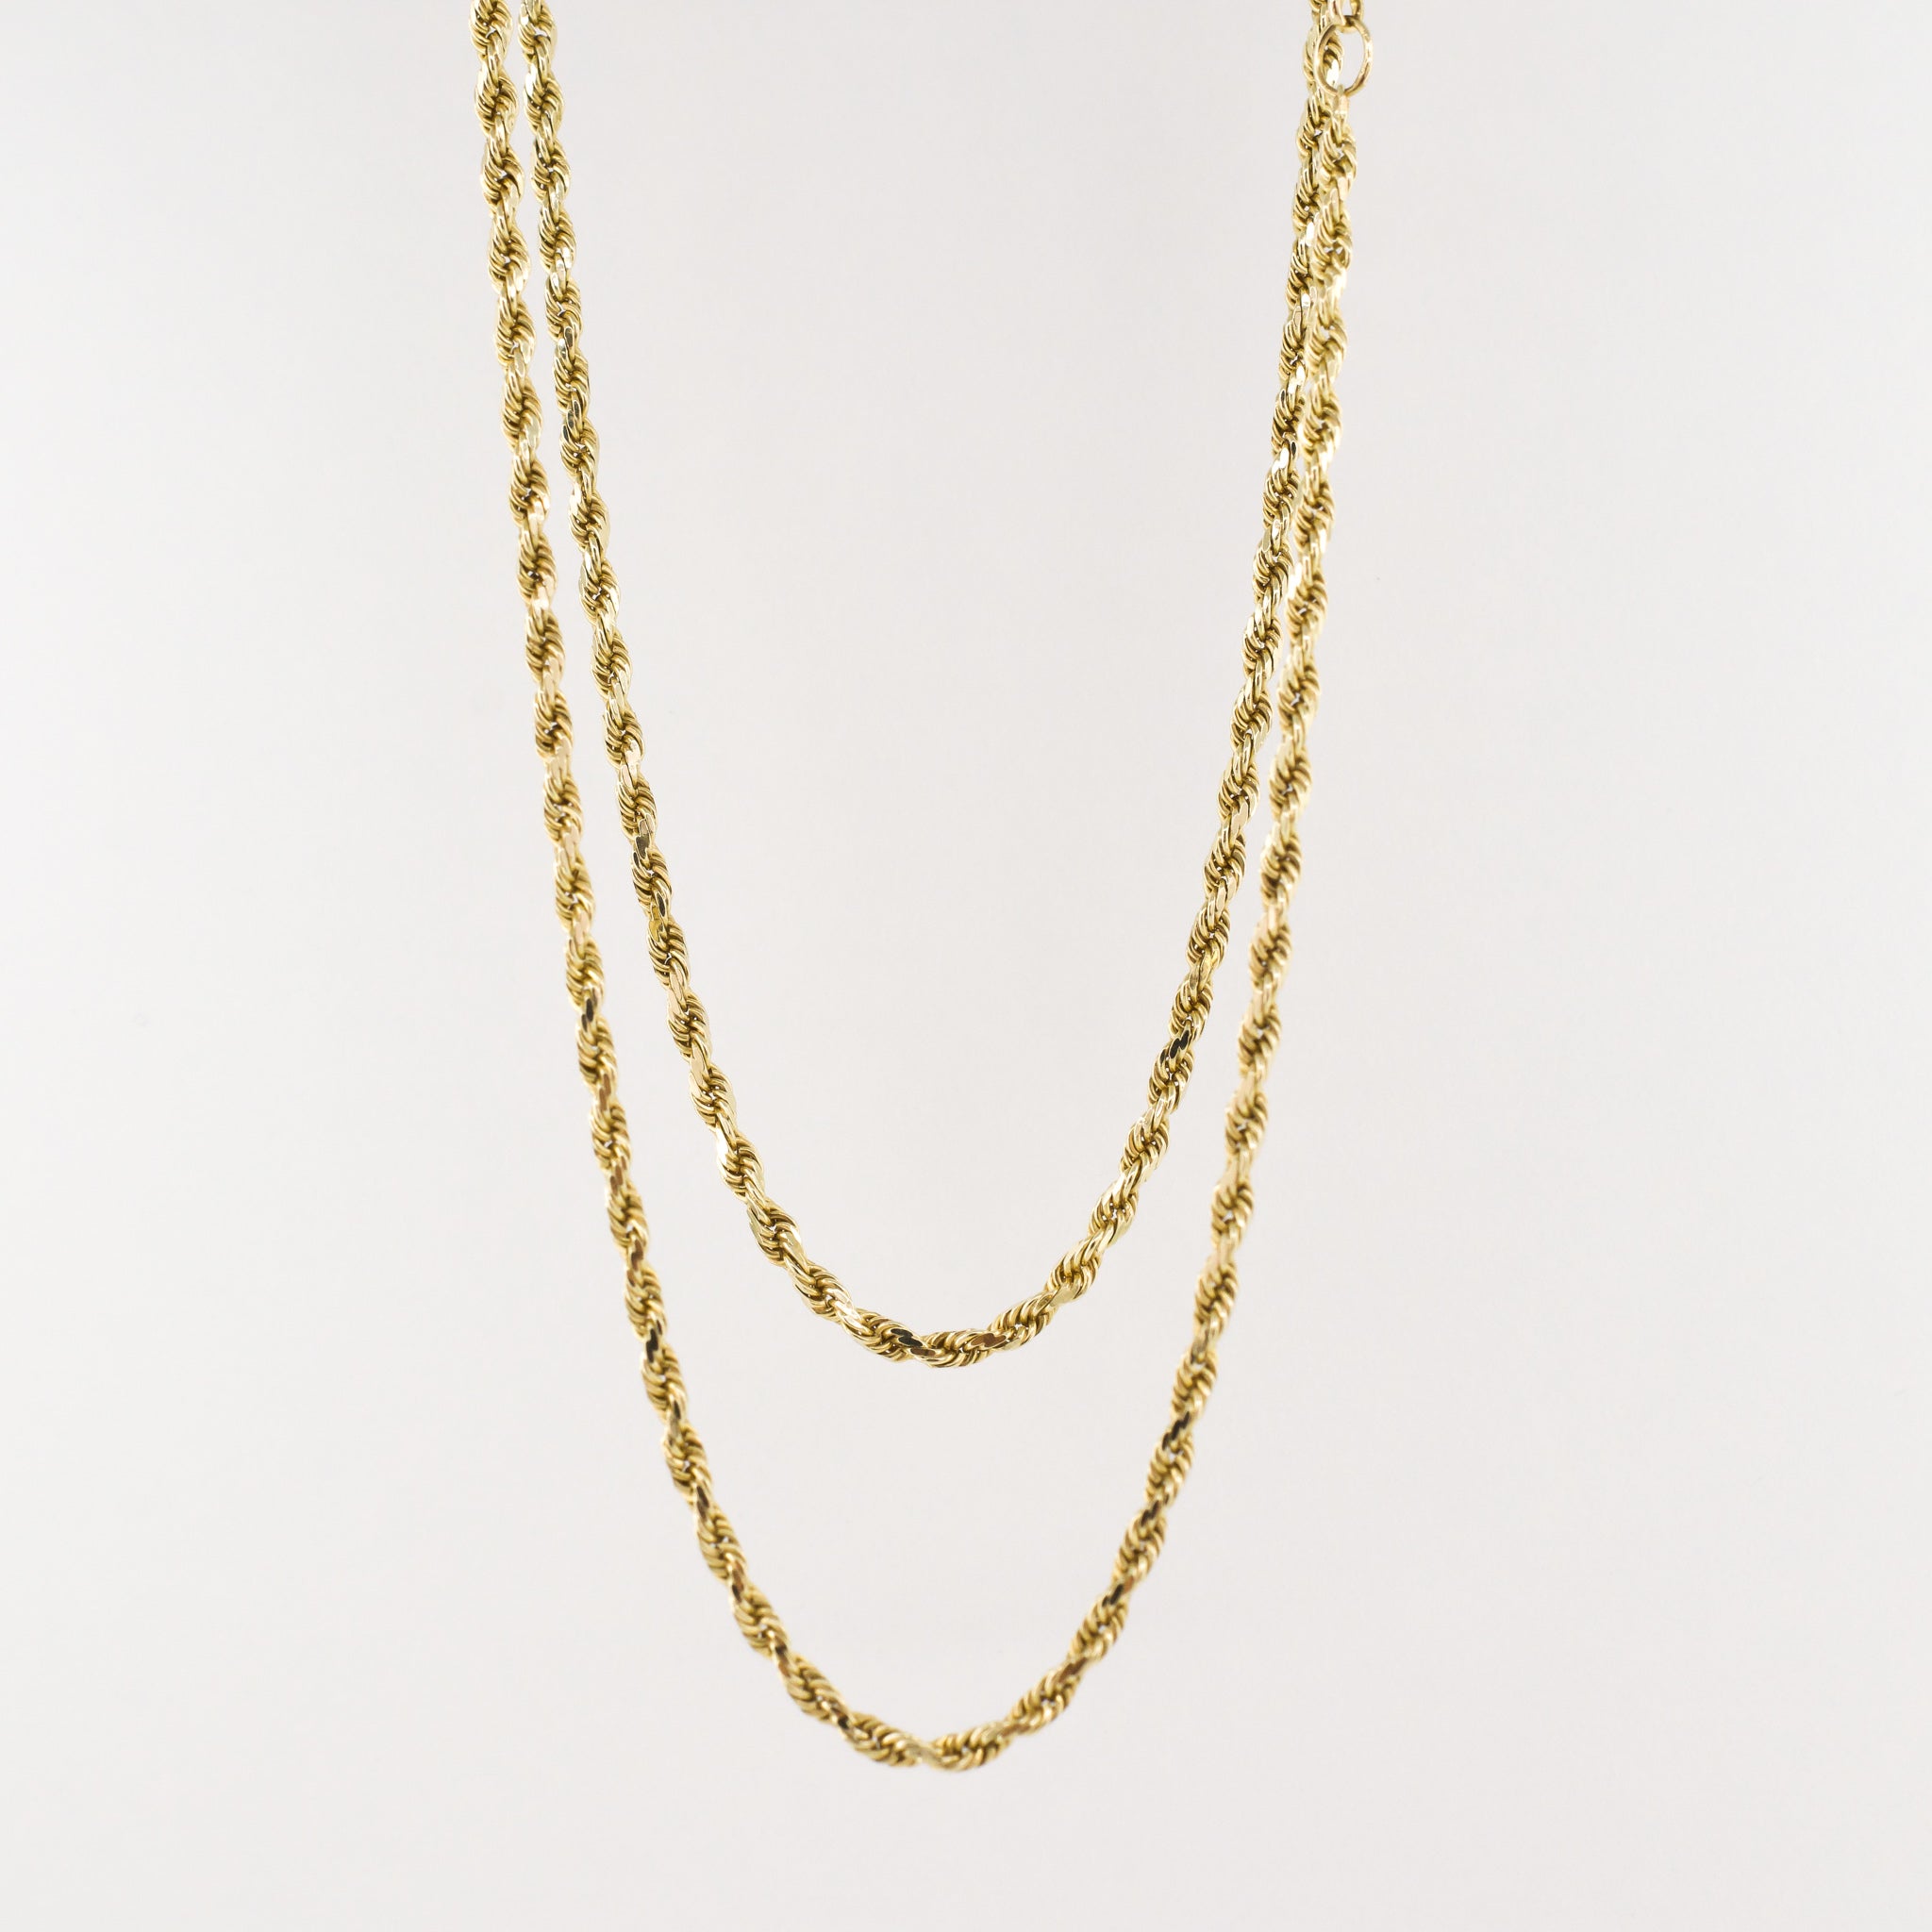 21" Sparkling Rope Chain